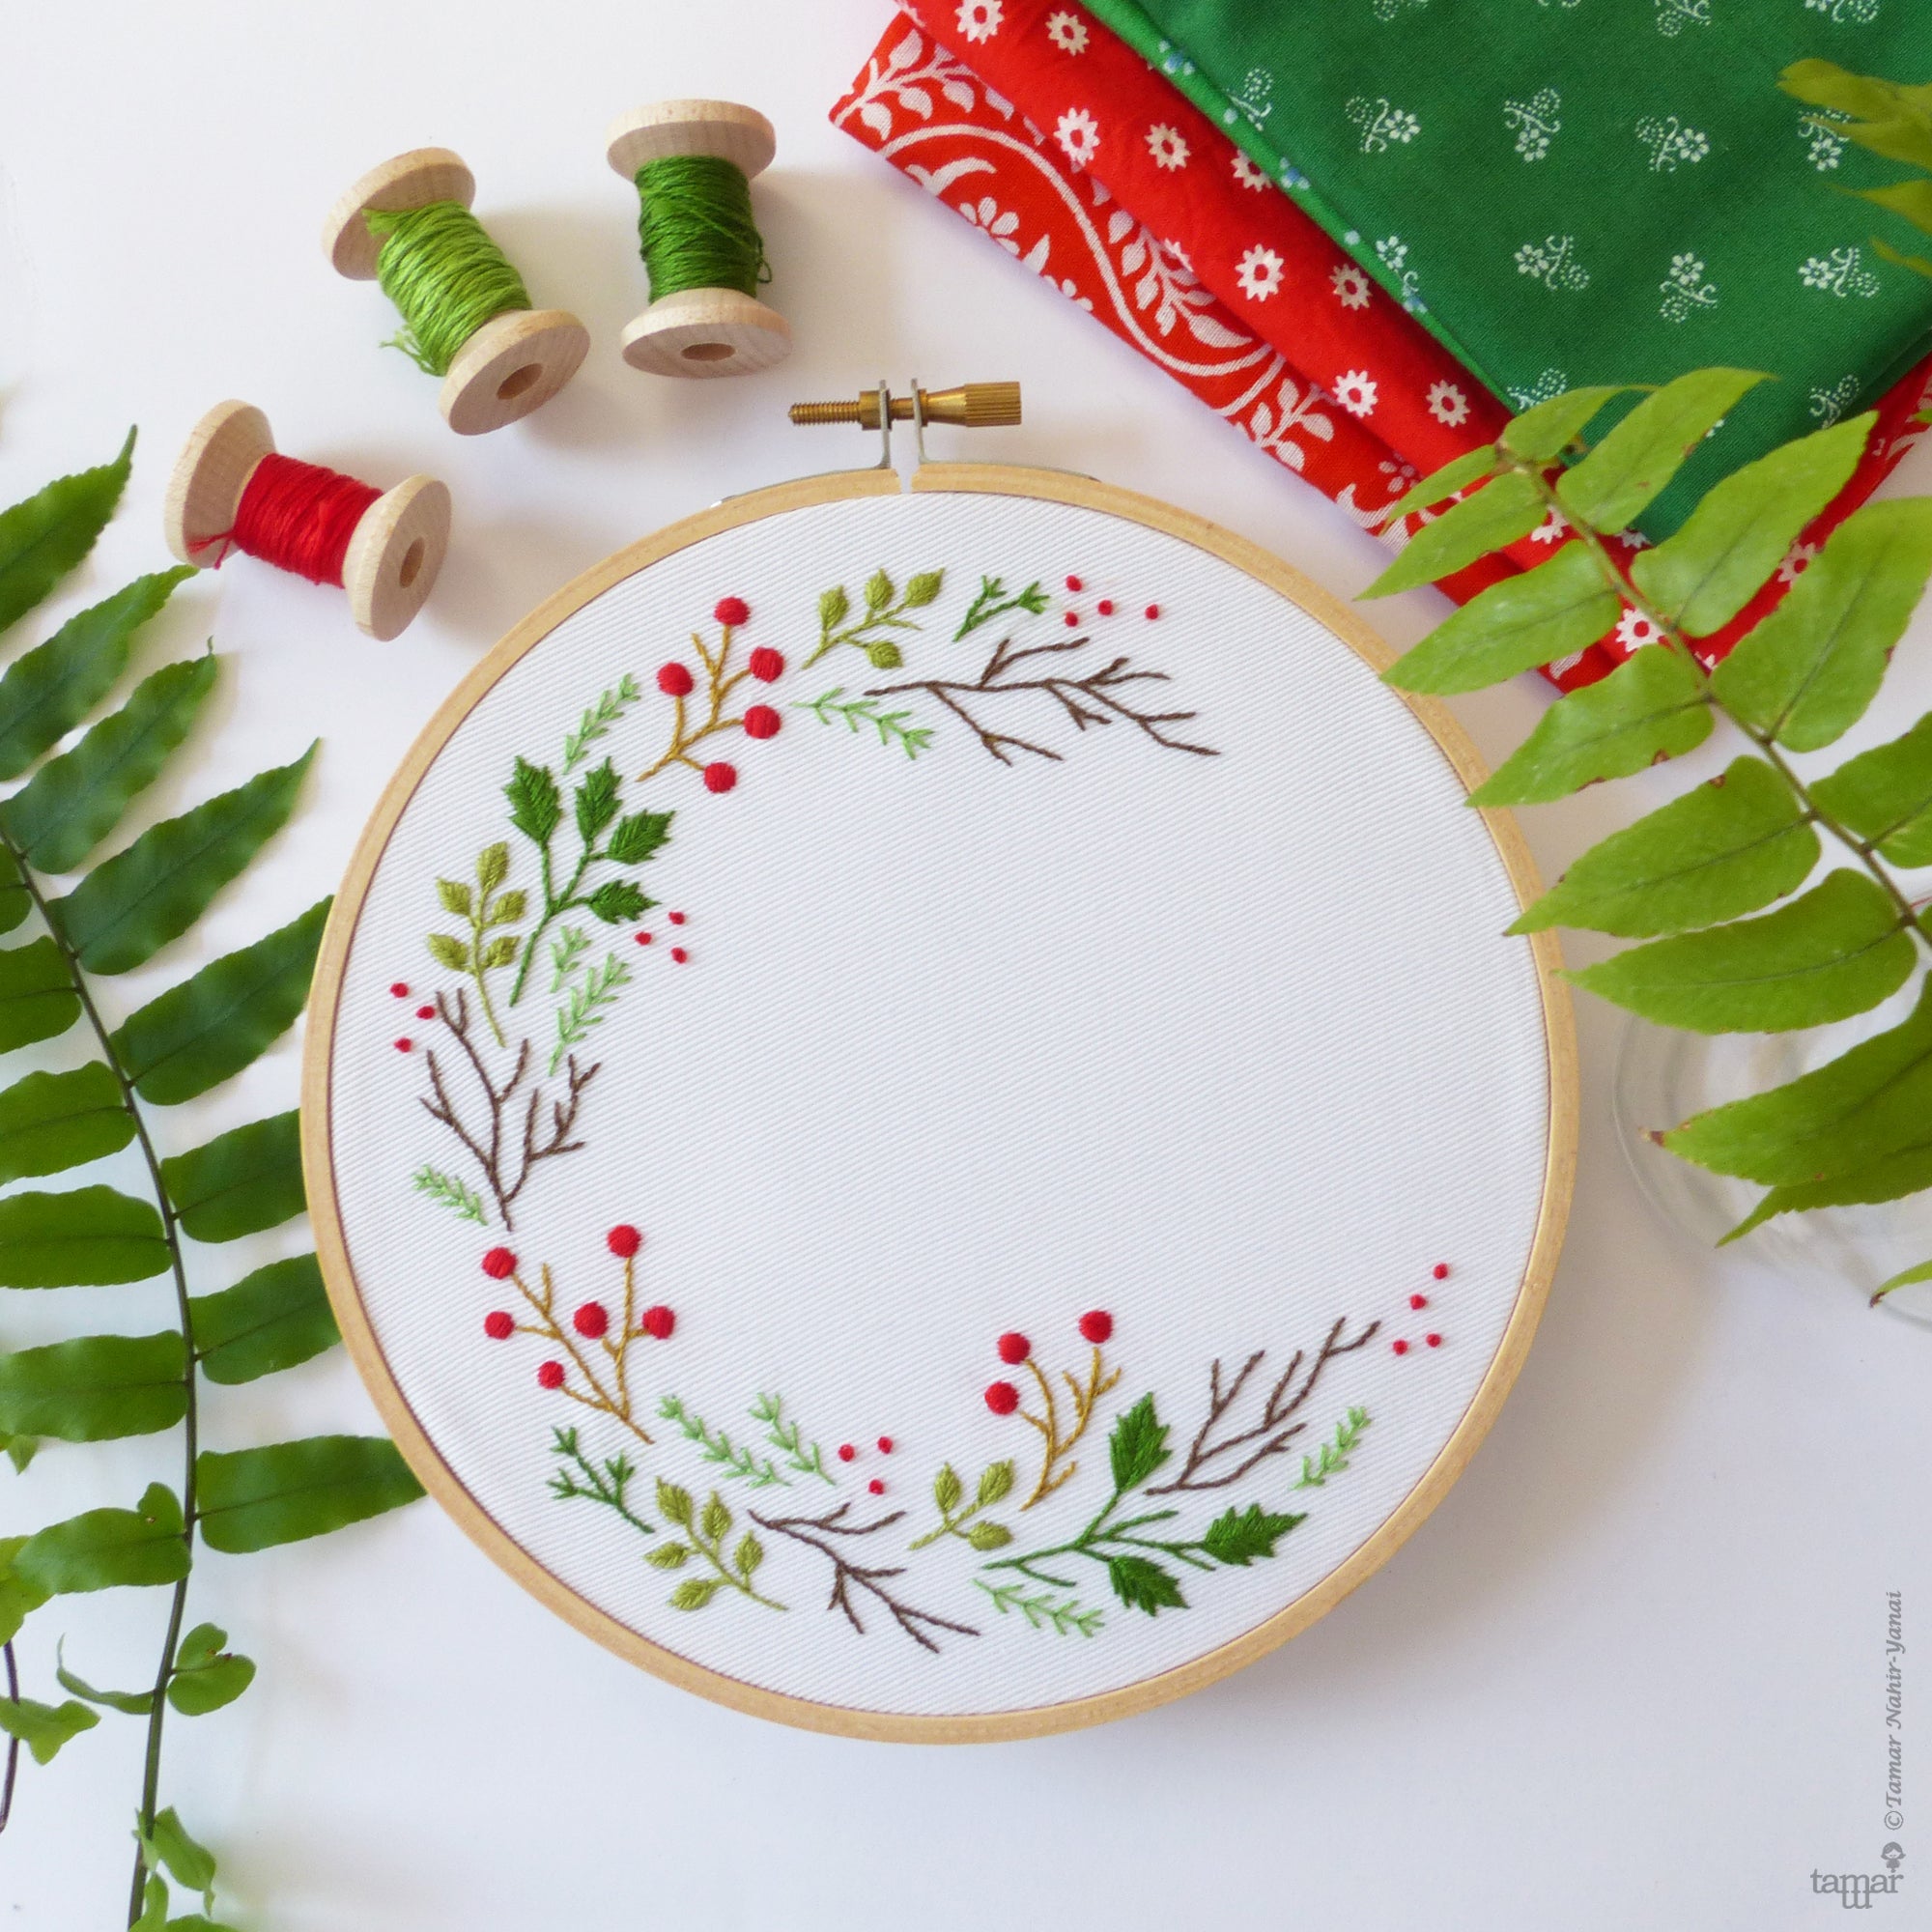 Embroidery Hoop Craft with Christmas Wreath Material